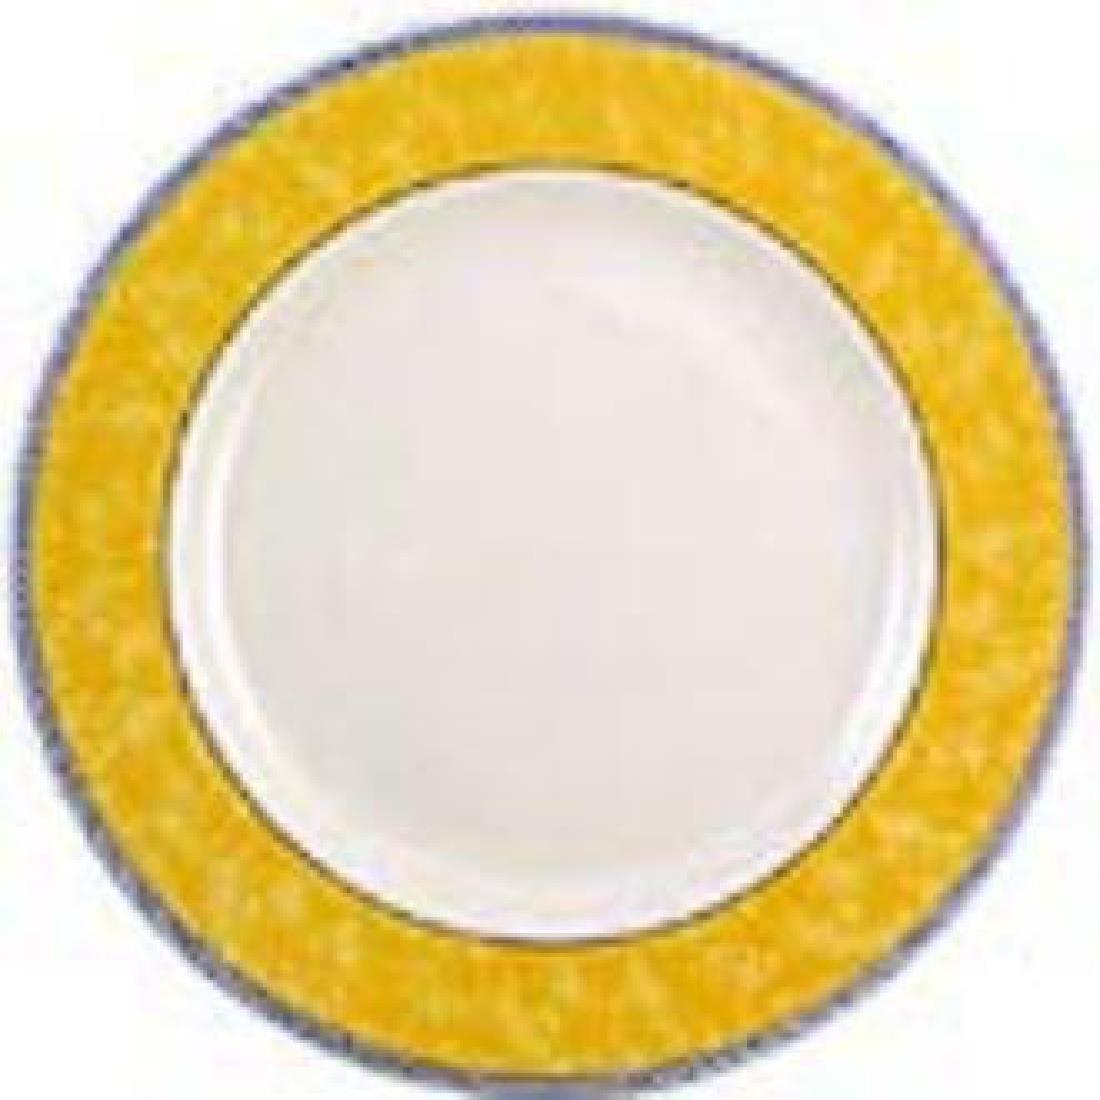 Churchill New Horizons Marble Border Classic Plates Yellow 254mm (Pack of 24) - M780  - 1